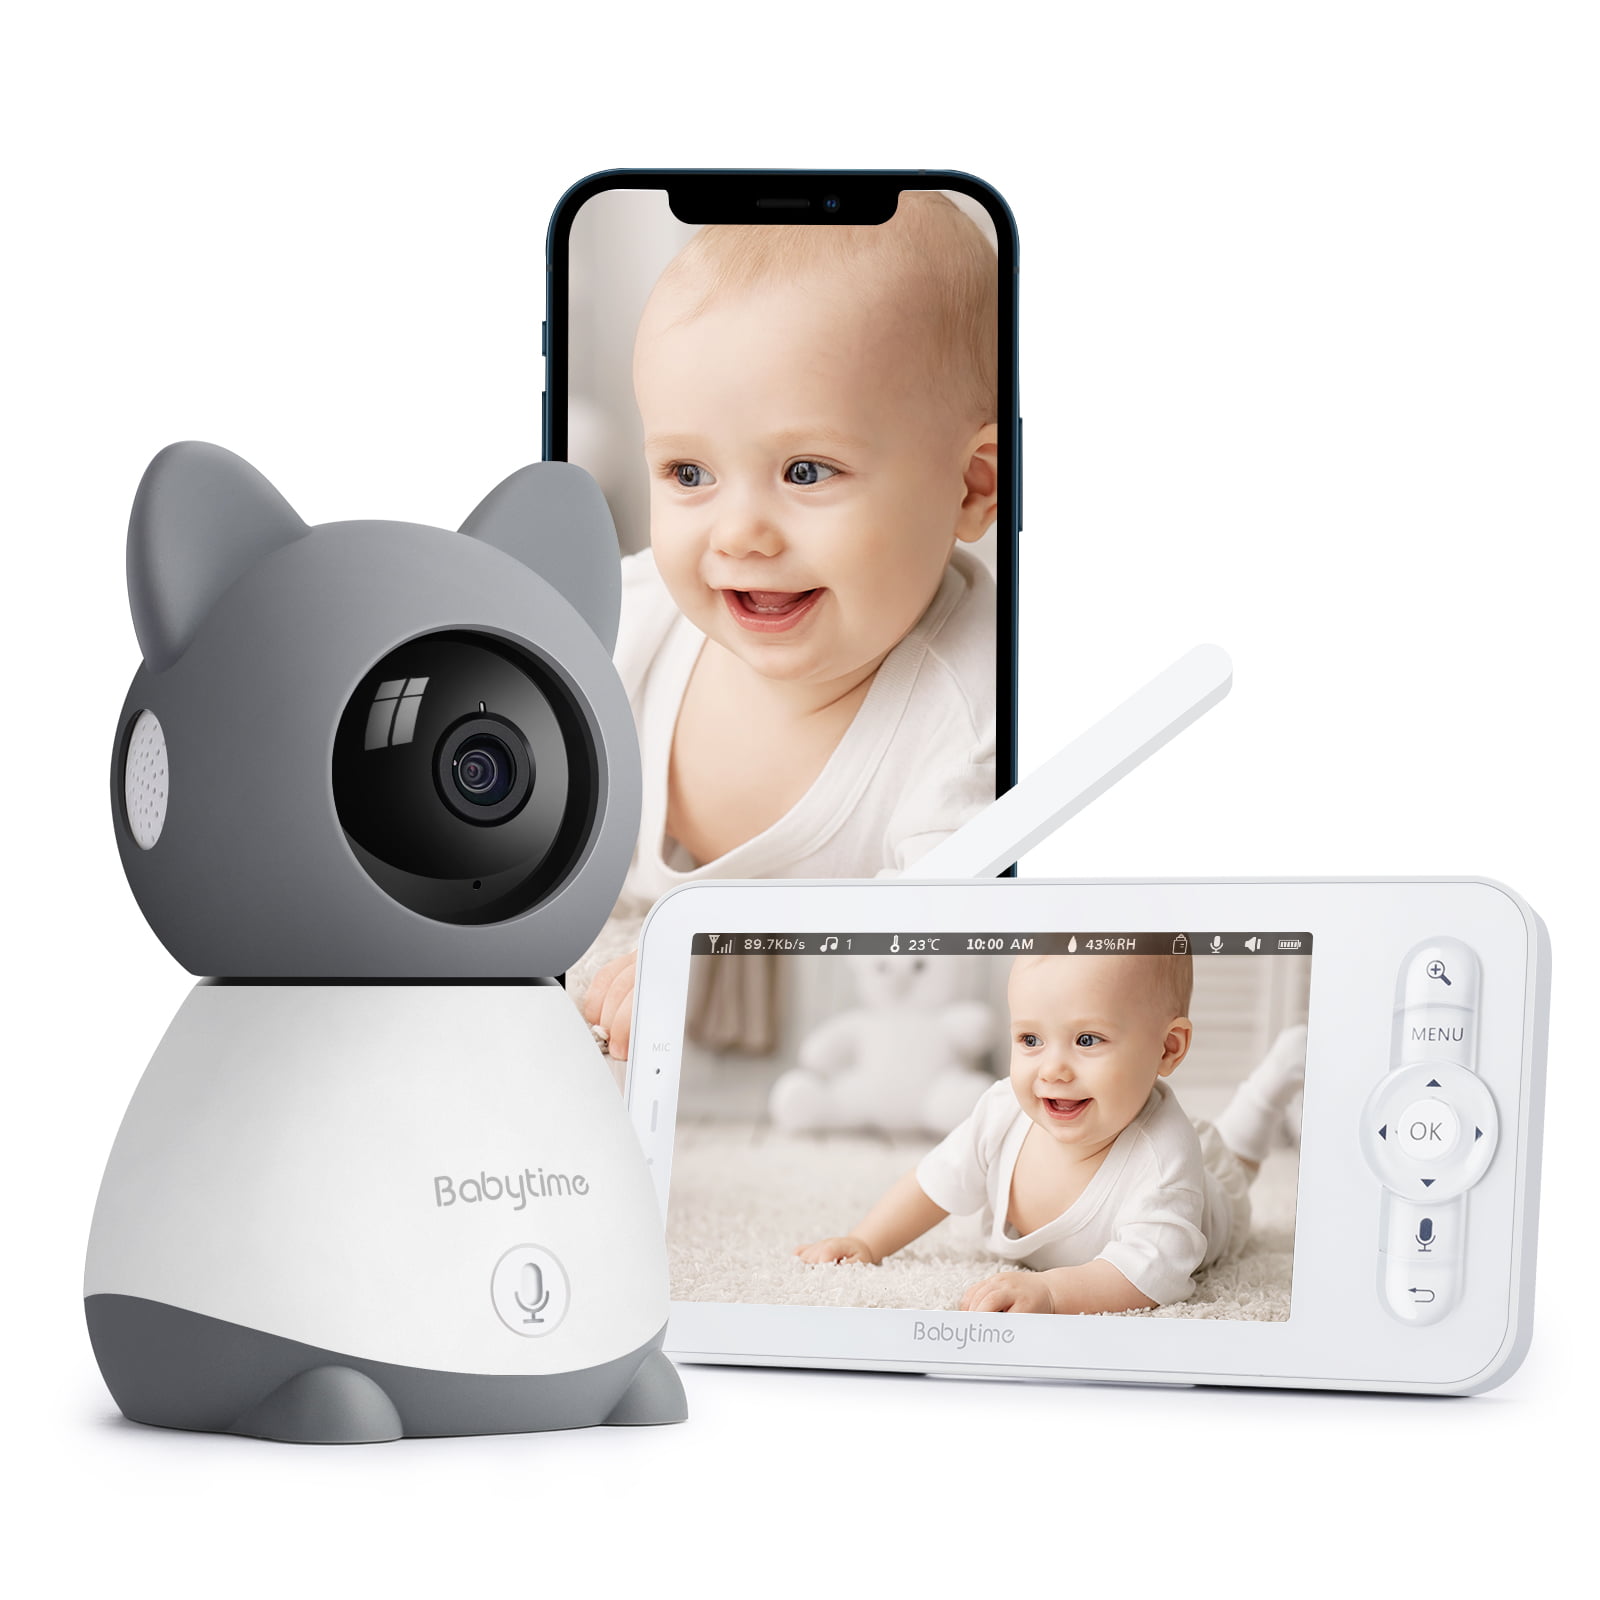 Equipped with Night Vision Mode Exceptional Picture Quality & Audio Perfect Nursery Accessory High-Performing Baby Monitor with Camera Includes Temperature Display Pan-Tilt-Zoom Baby Camera 